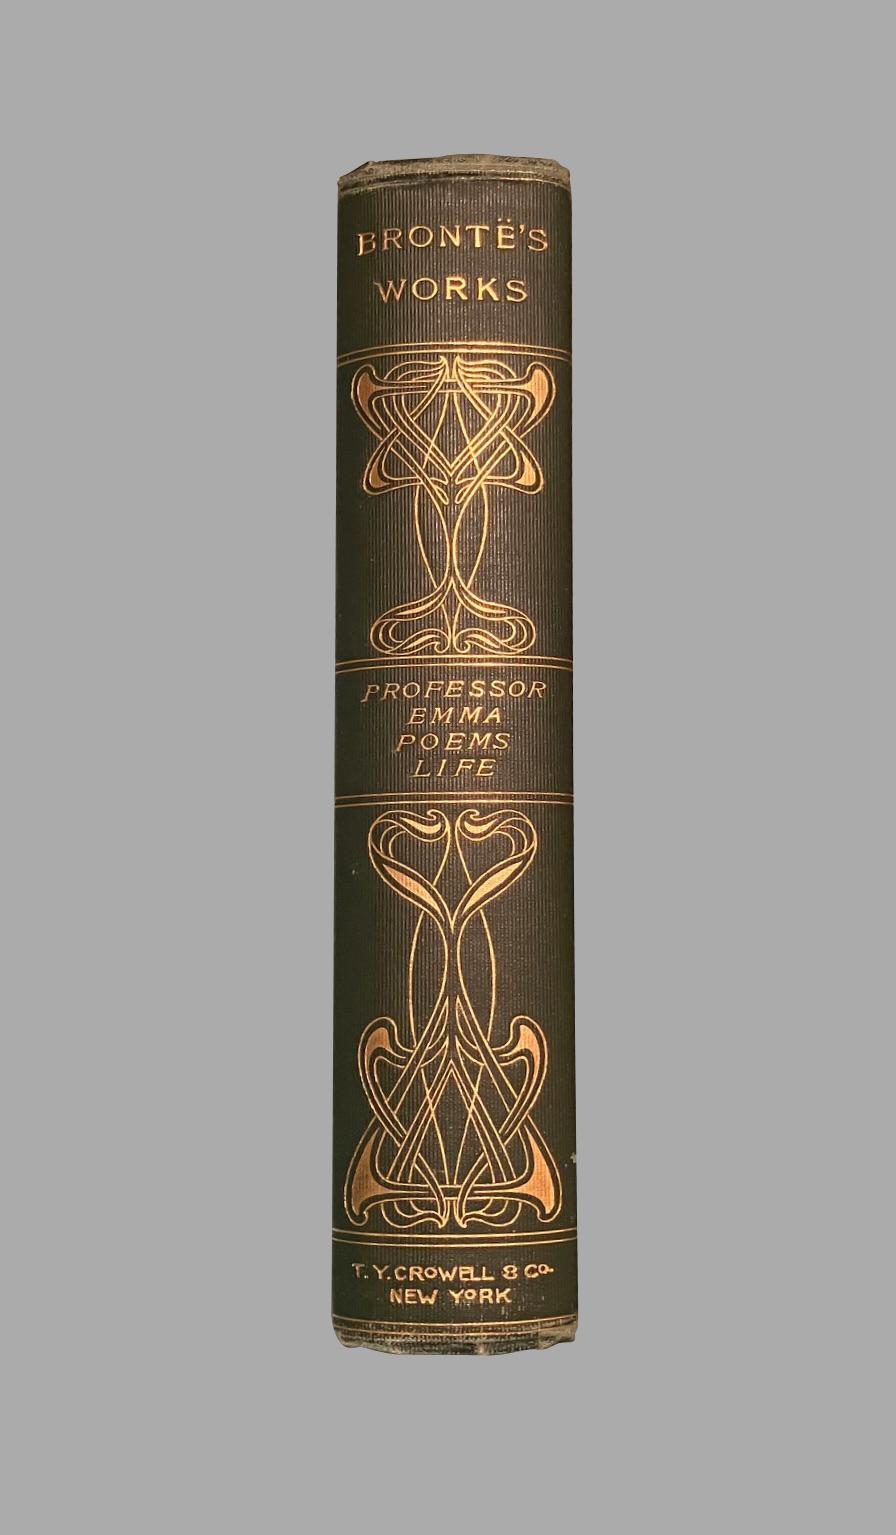 American The Complete Works of Charlotte Bronte and Her Sisters in 6 Volumes Circa 1910